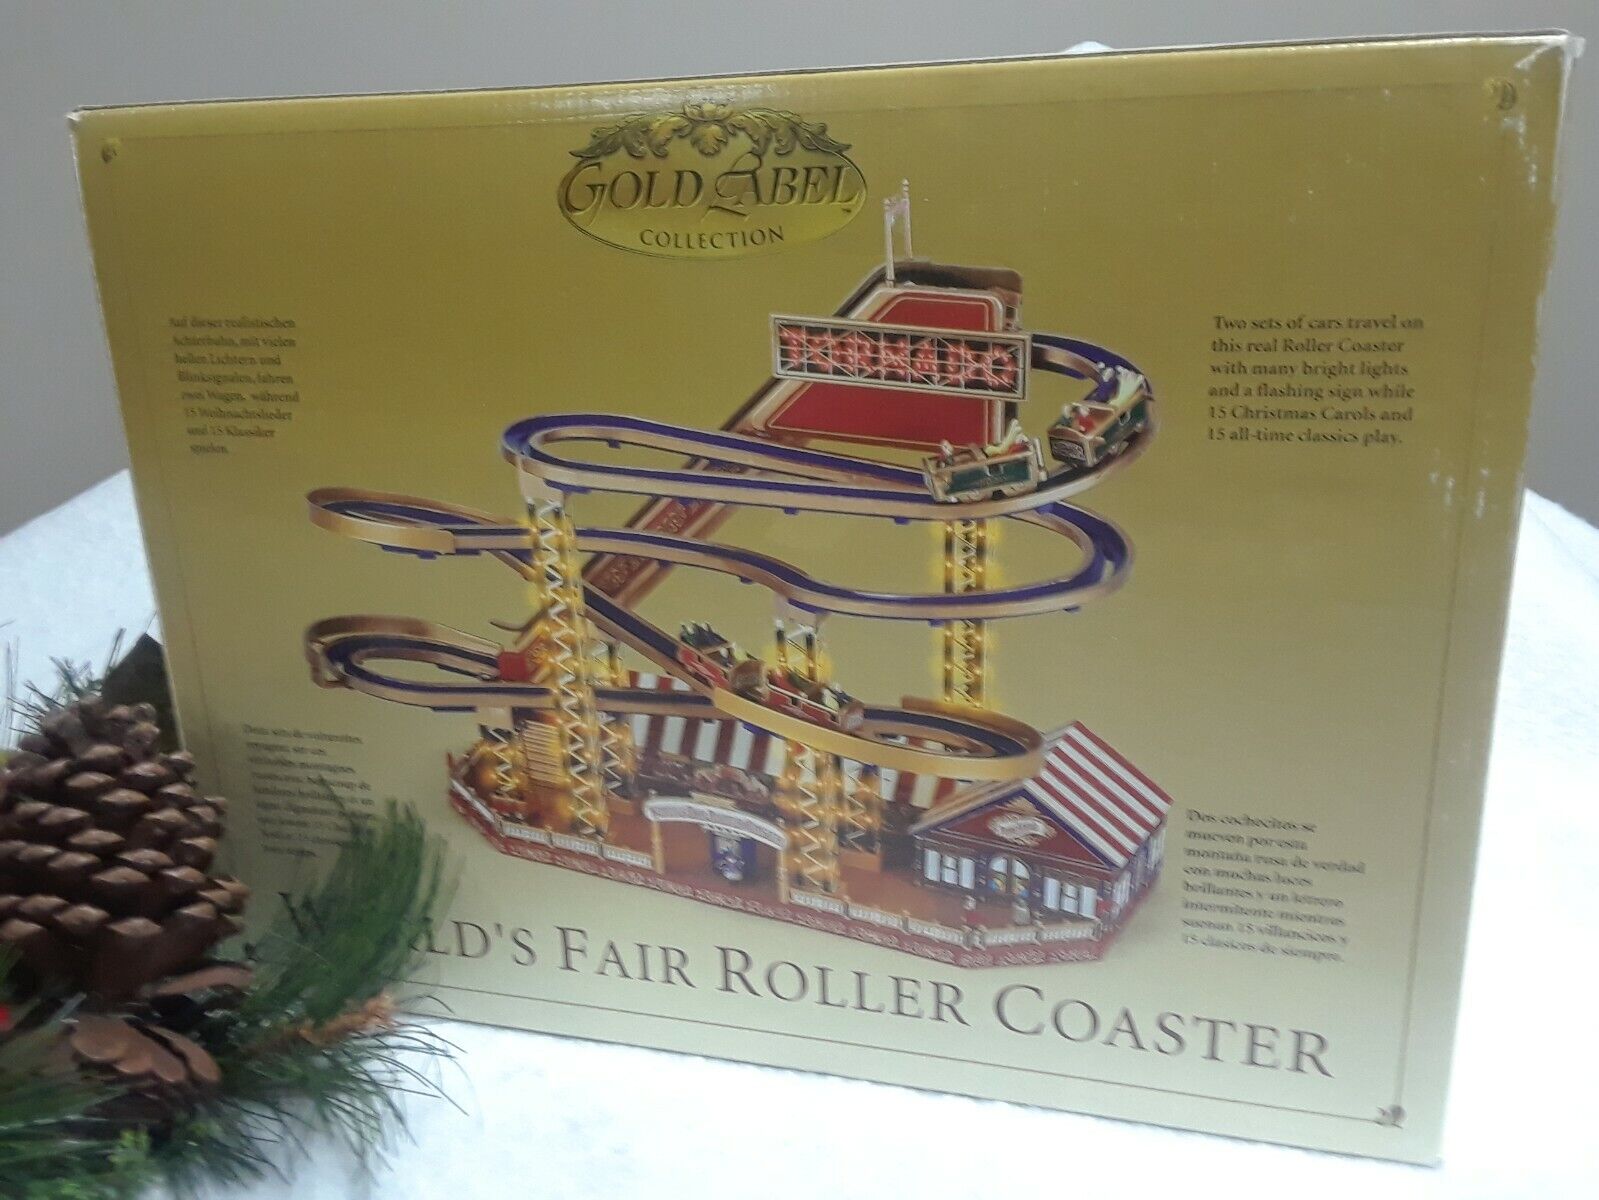 World's Fair Roller coaster Gold Label collection